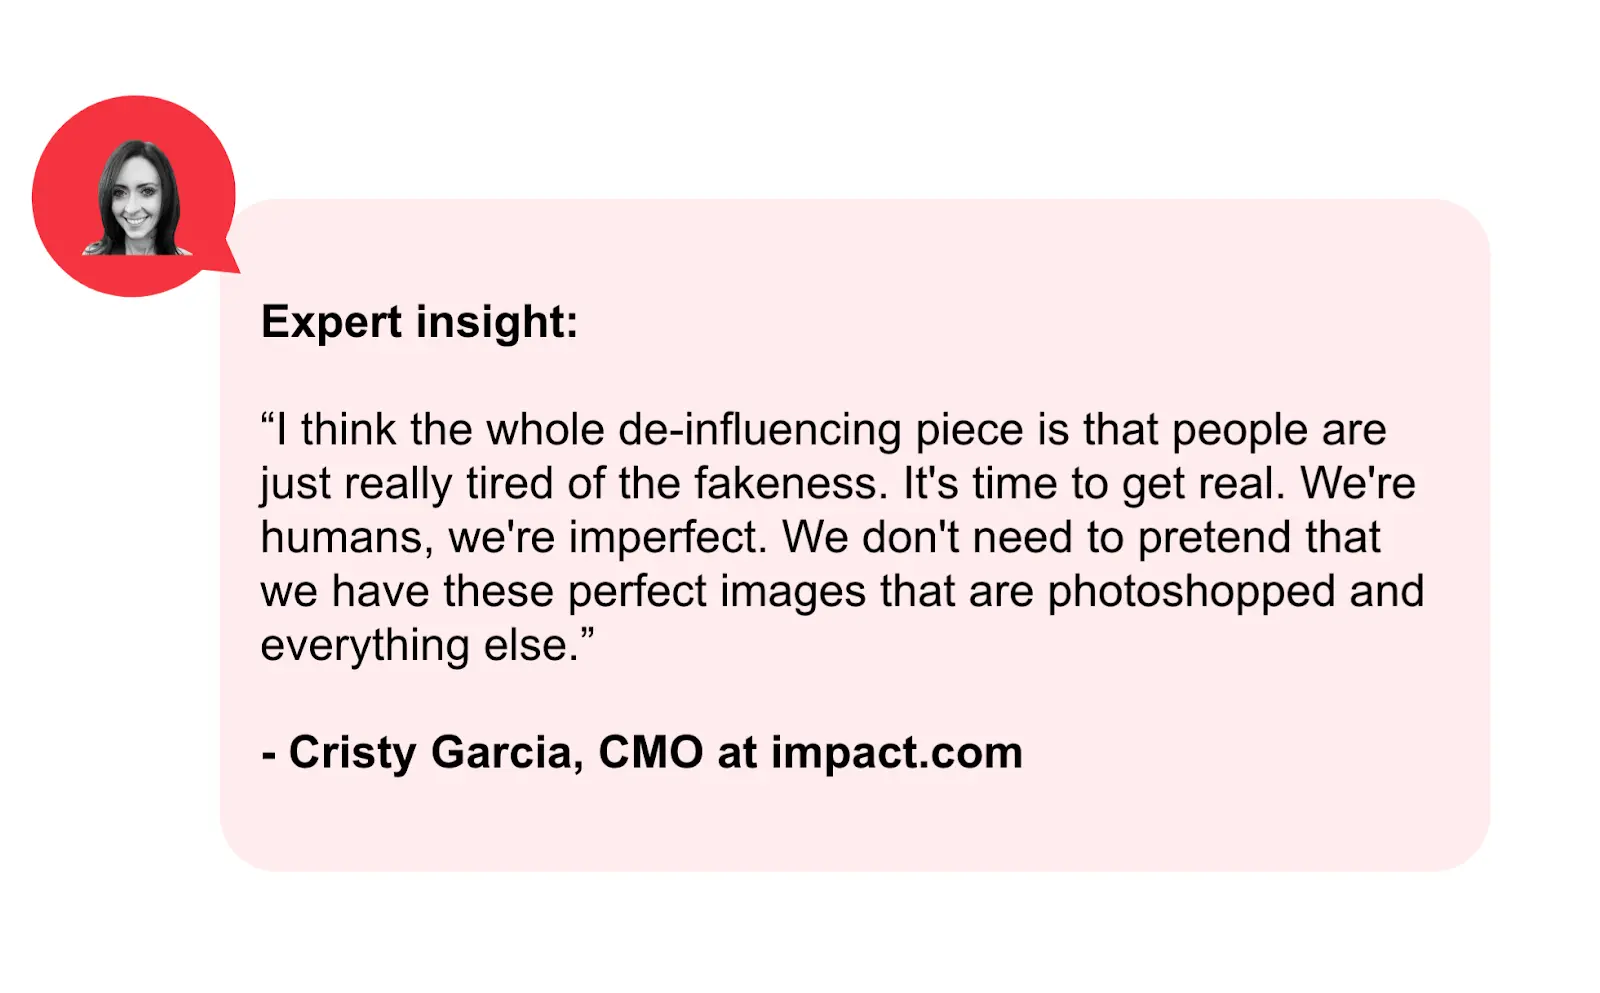 Quote by Cristy Garcia